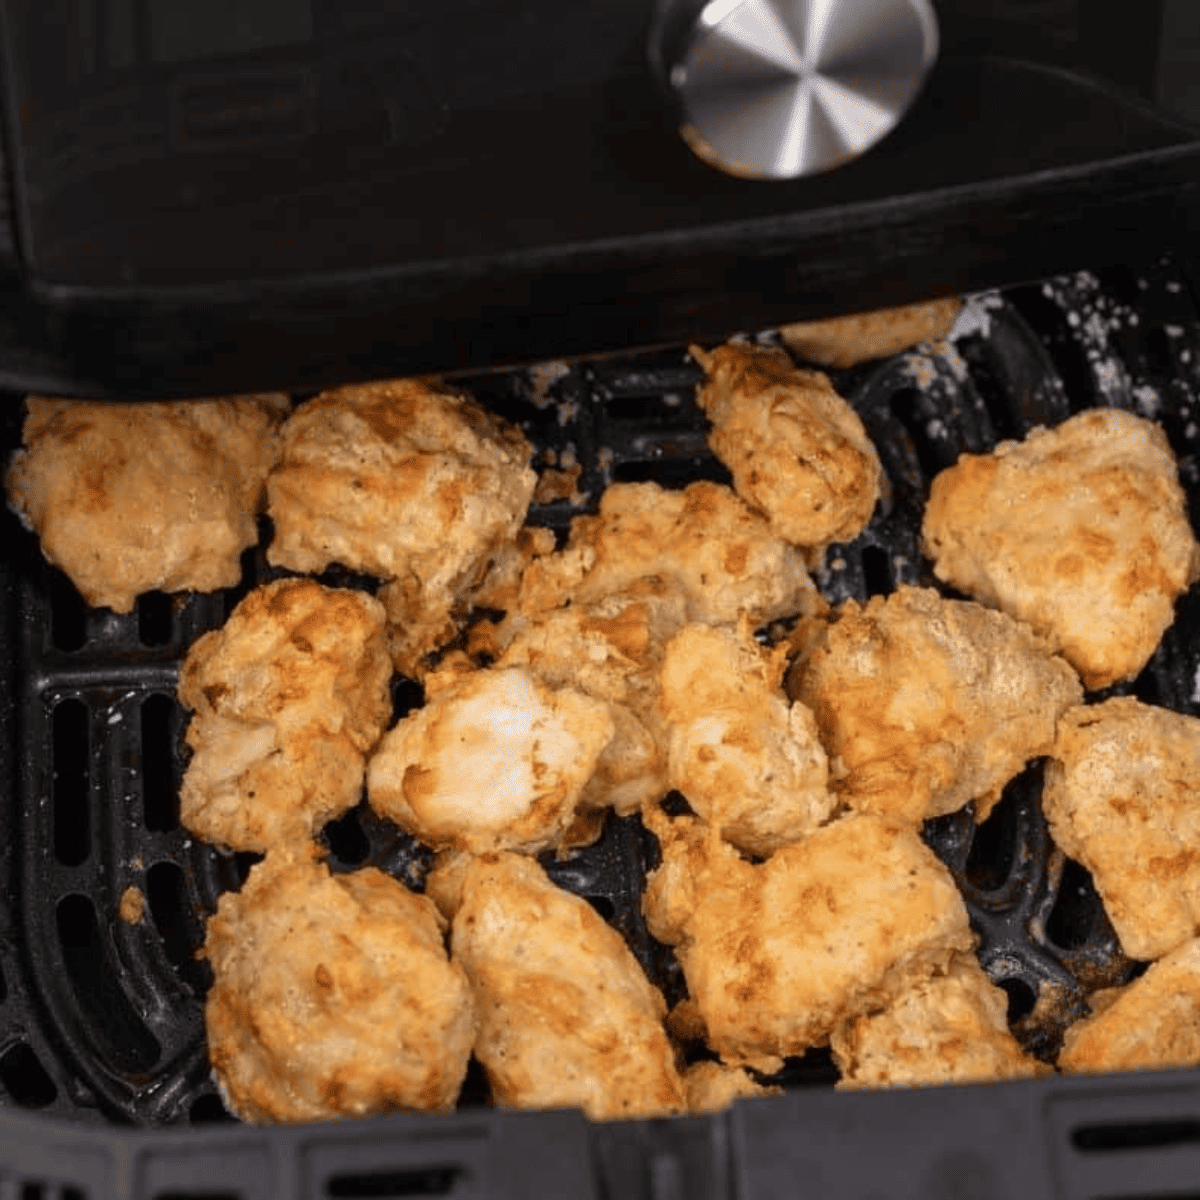 How To Make Sweet and Sour Chicken In Air Fryer